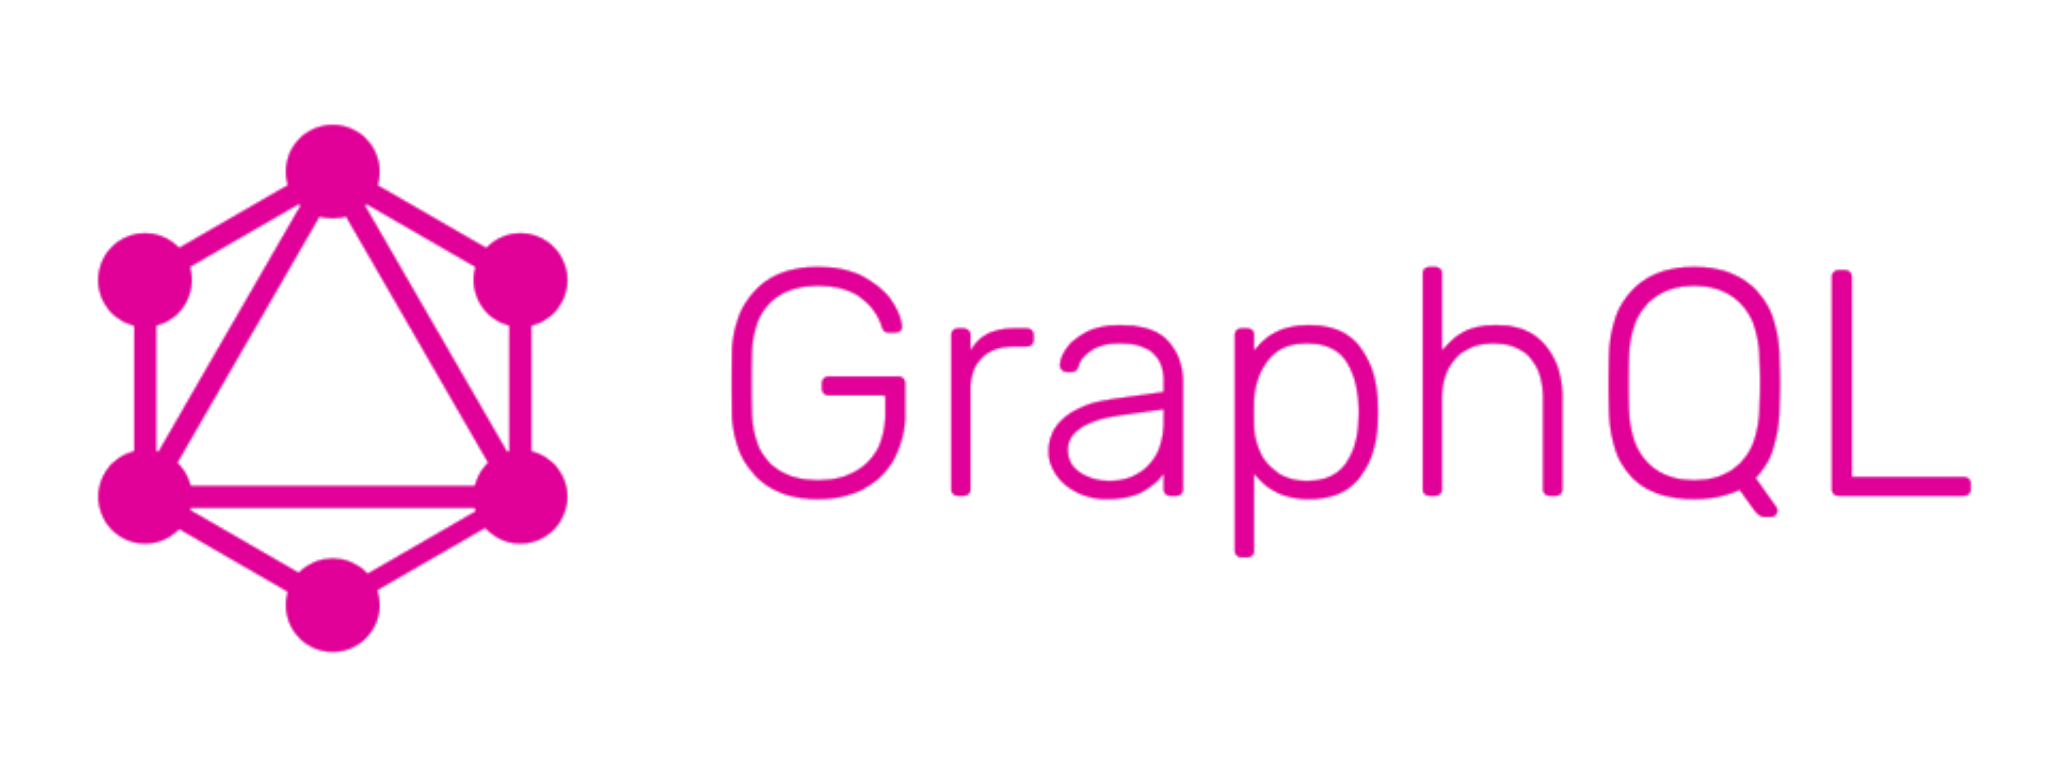 The GraphQL logo along with the words GraphQL is written in its signature pink across a white background.